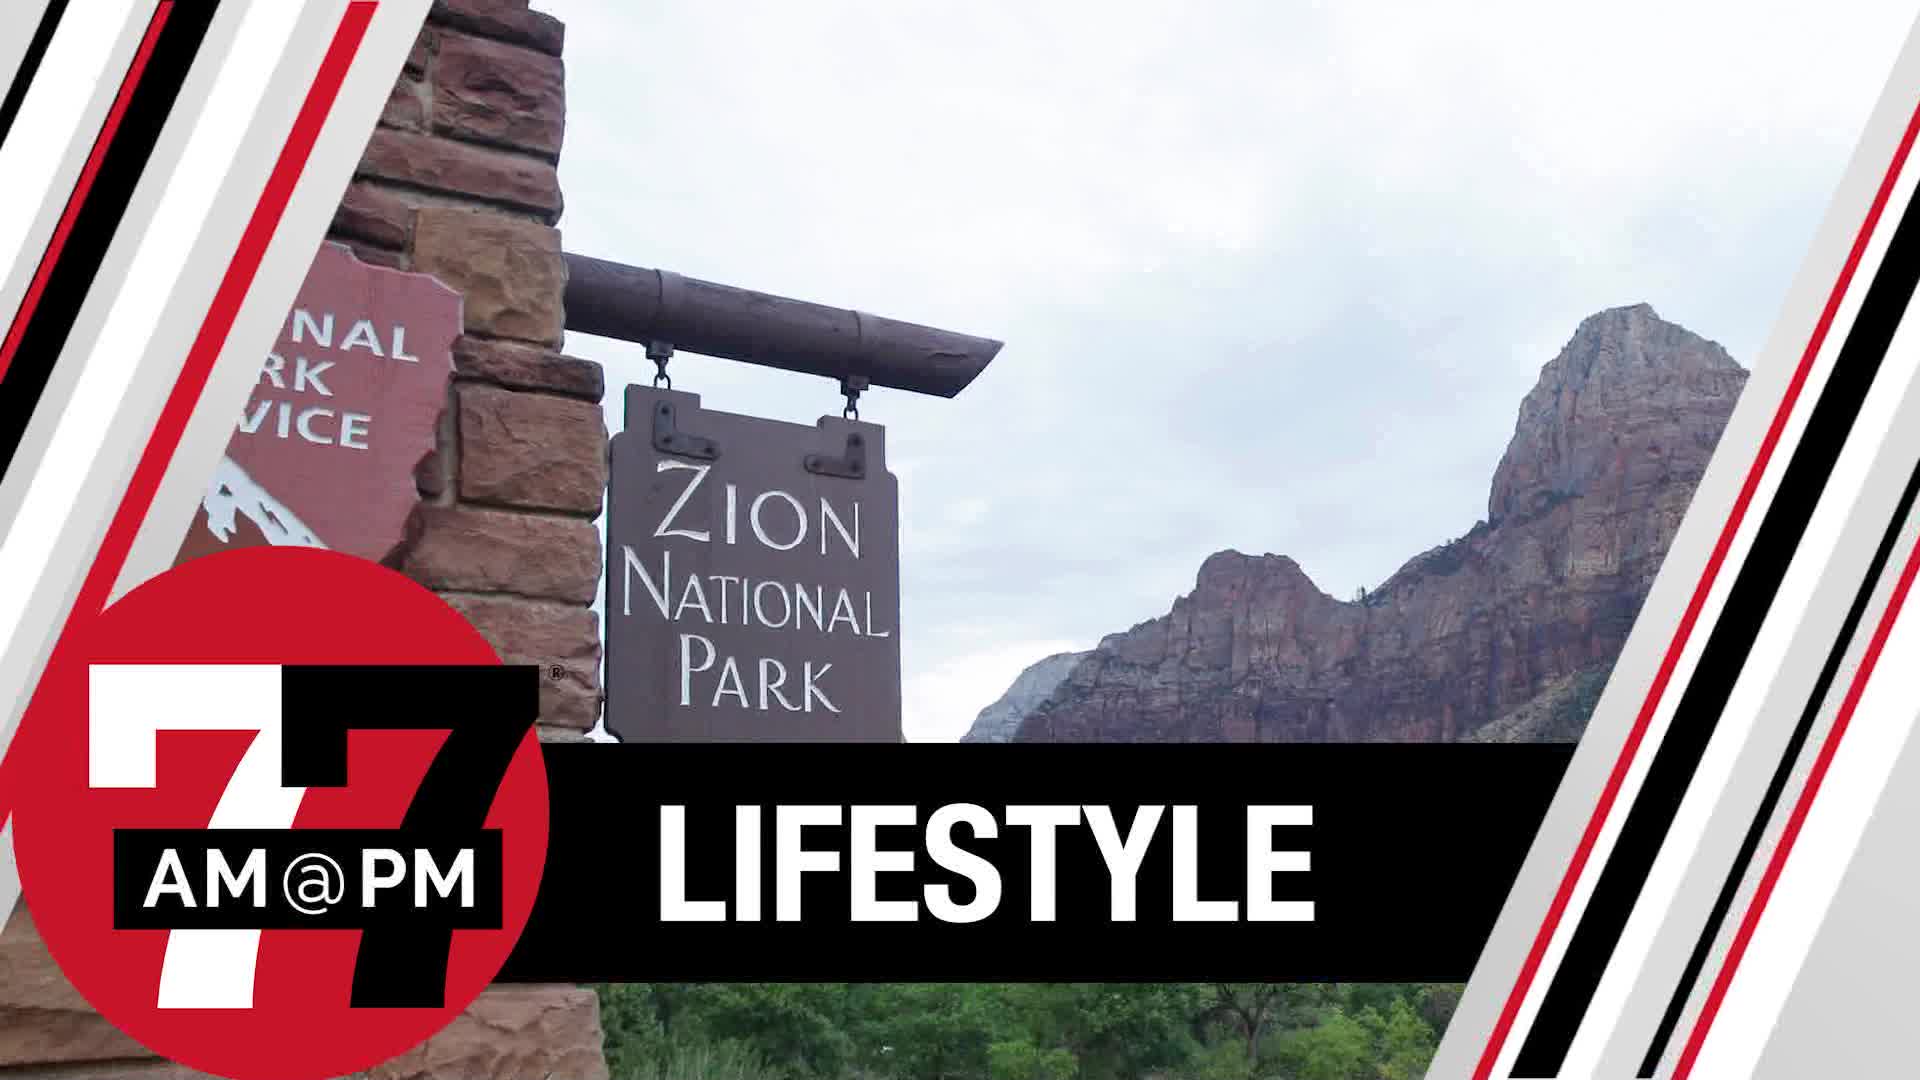 Climbing routes reopened at Zion